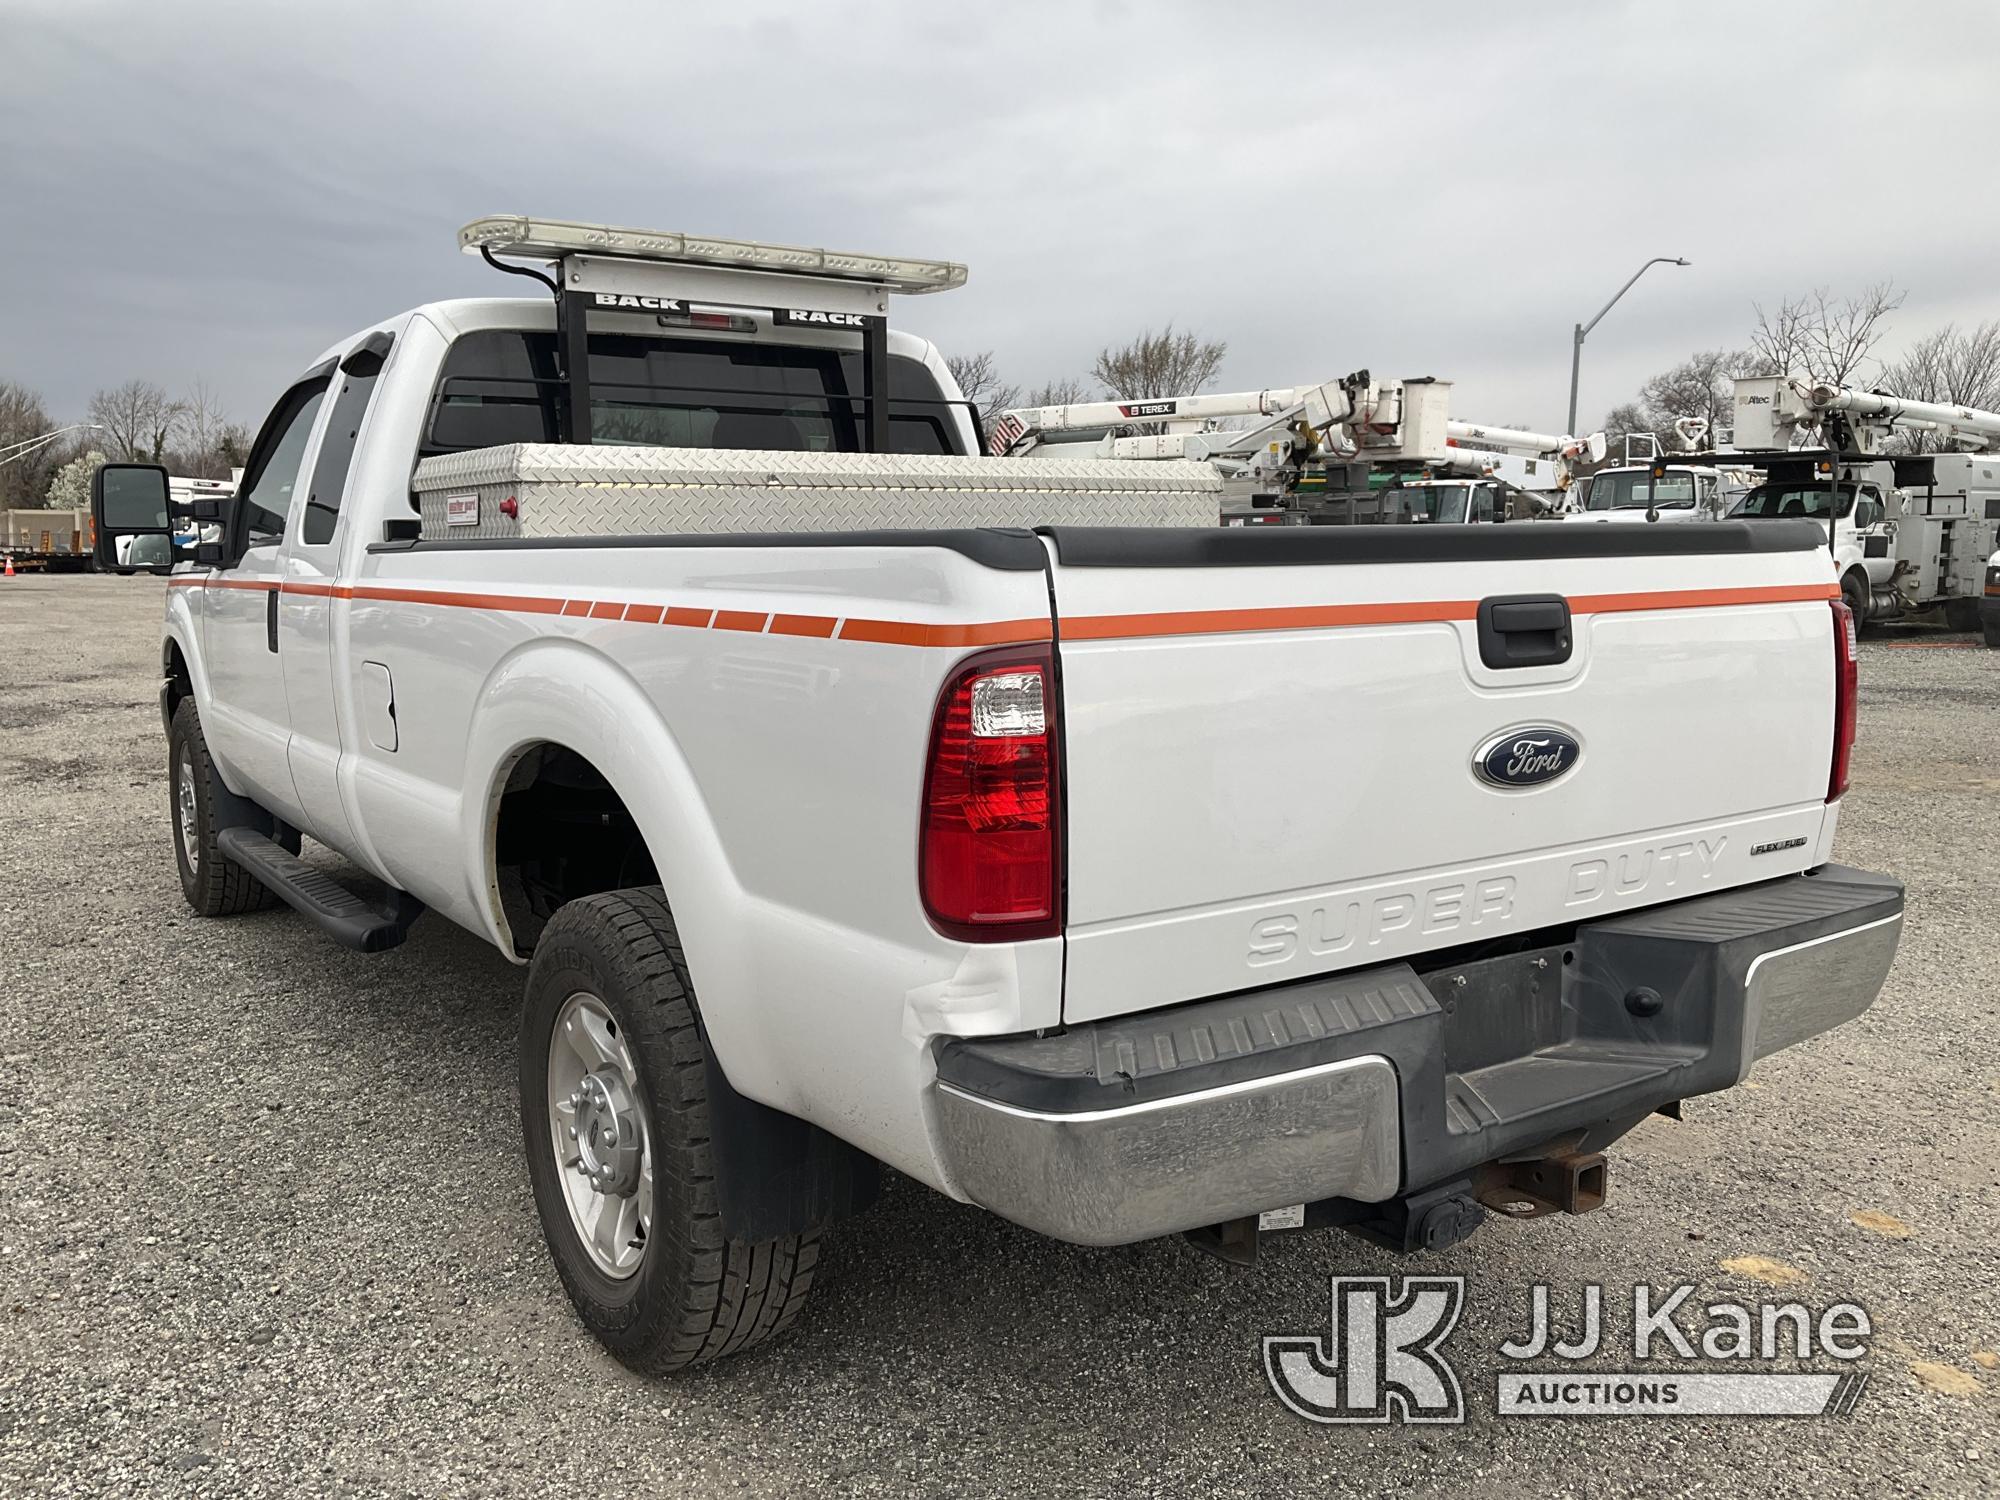 (Plymouth Meeting, PA) 2015 Ford F350 4x4 Extended-Cab Pickup Truck Runs & Moves, Body & Rust Damage